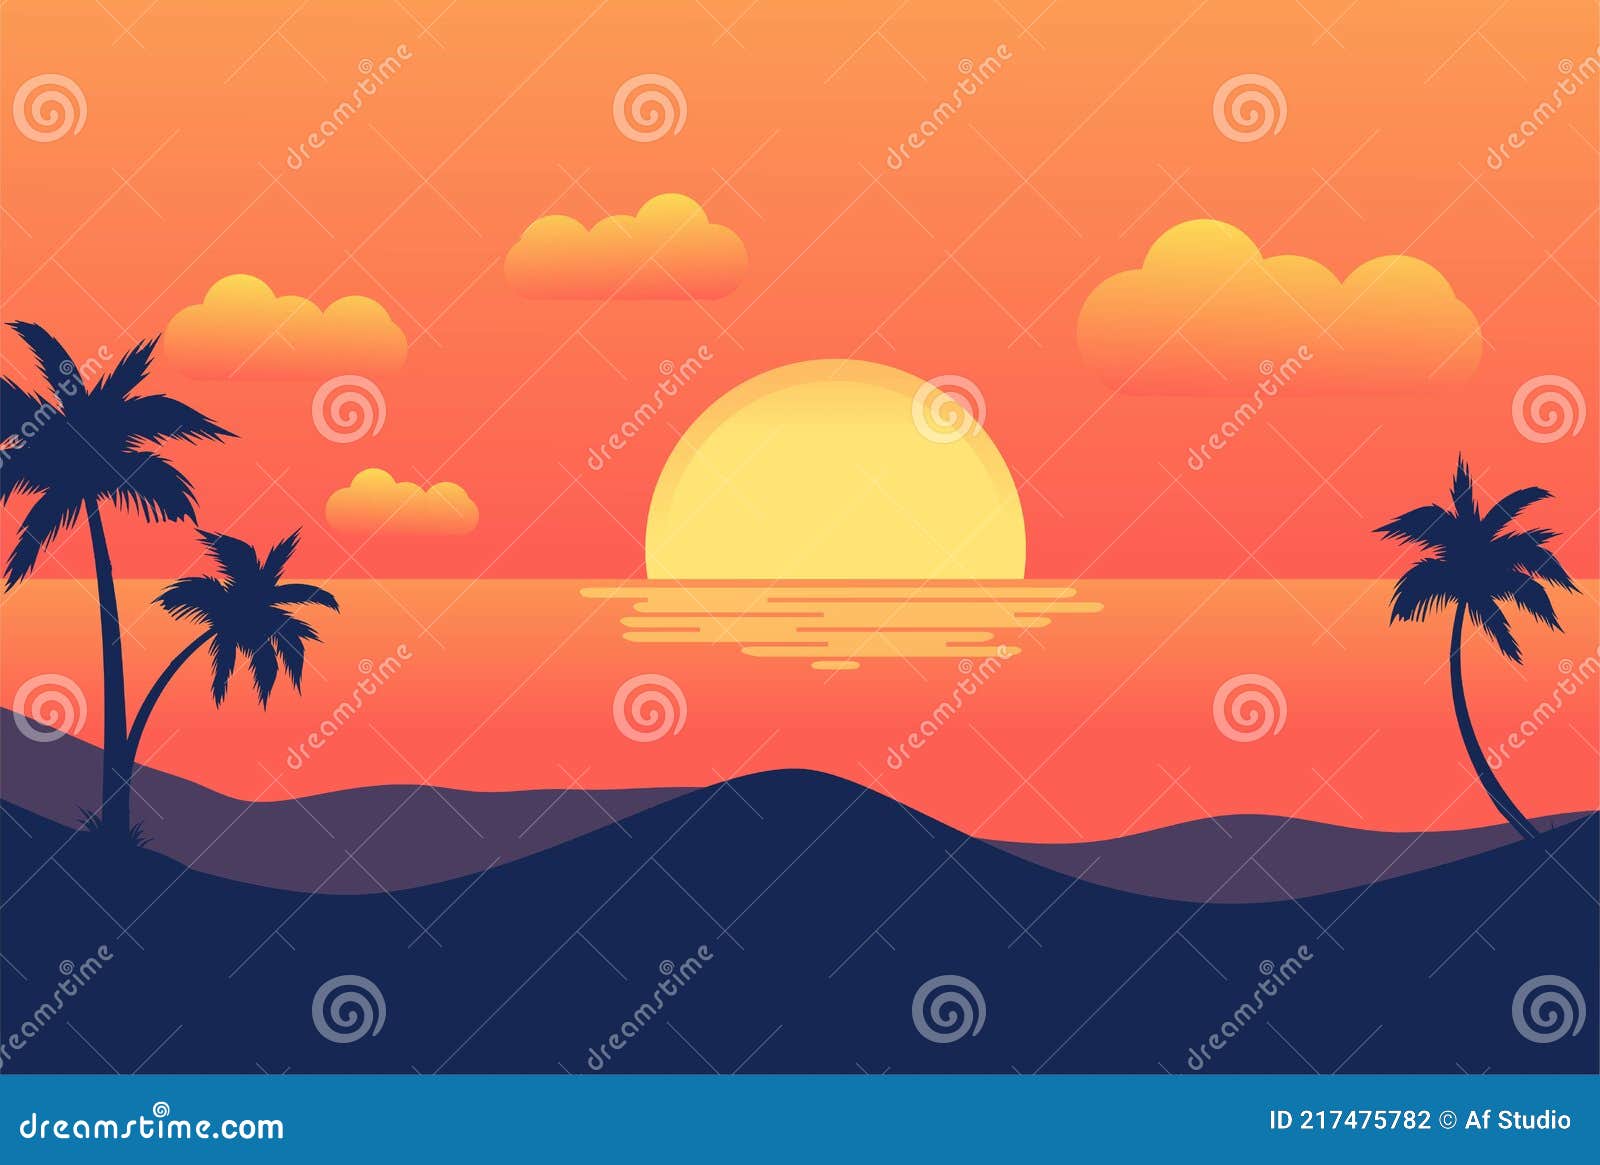 Sunset Tropical Beach with Palm Trees and Sea for Summer Resort ...